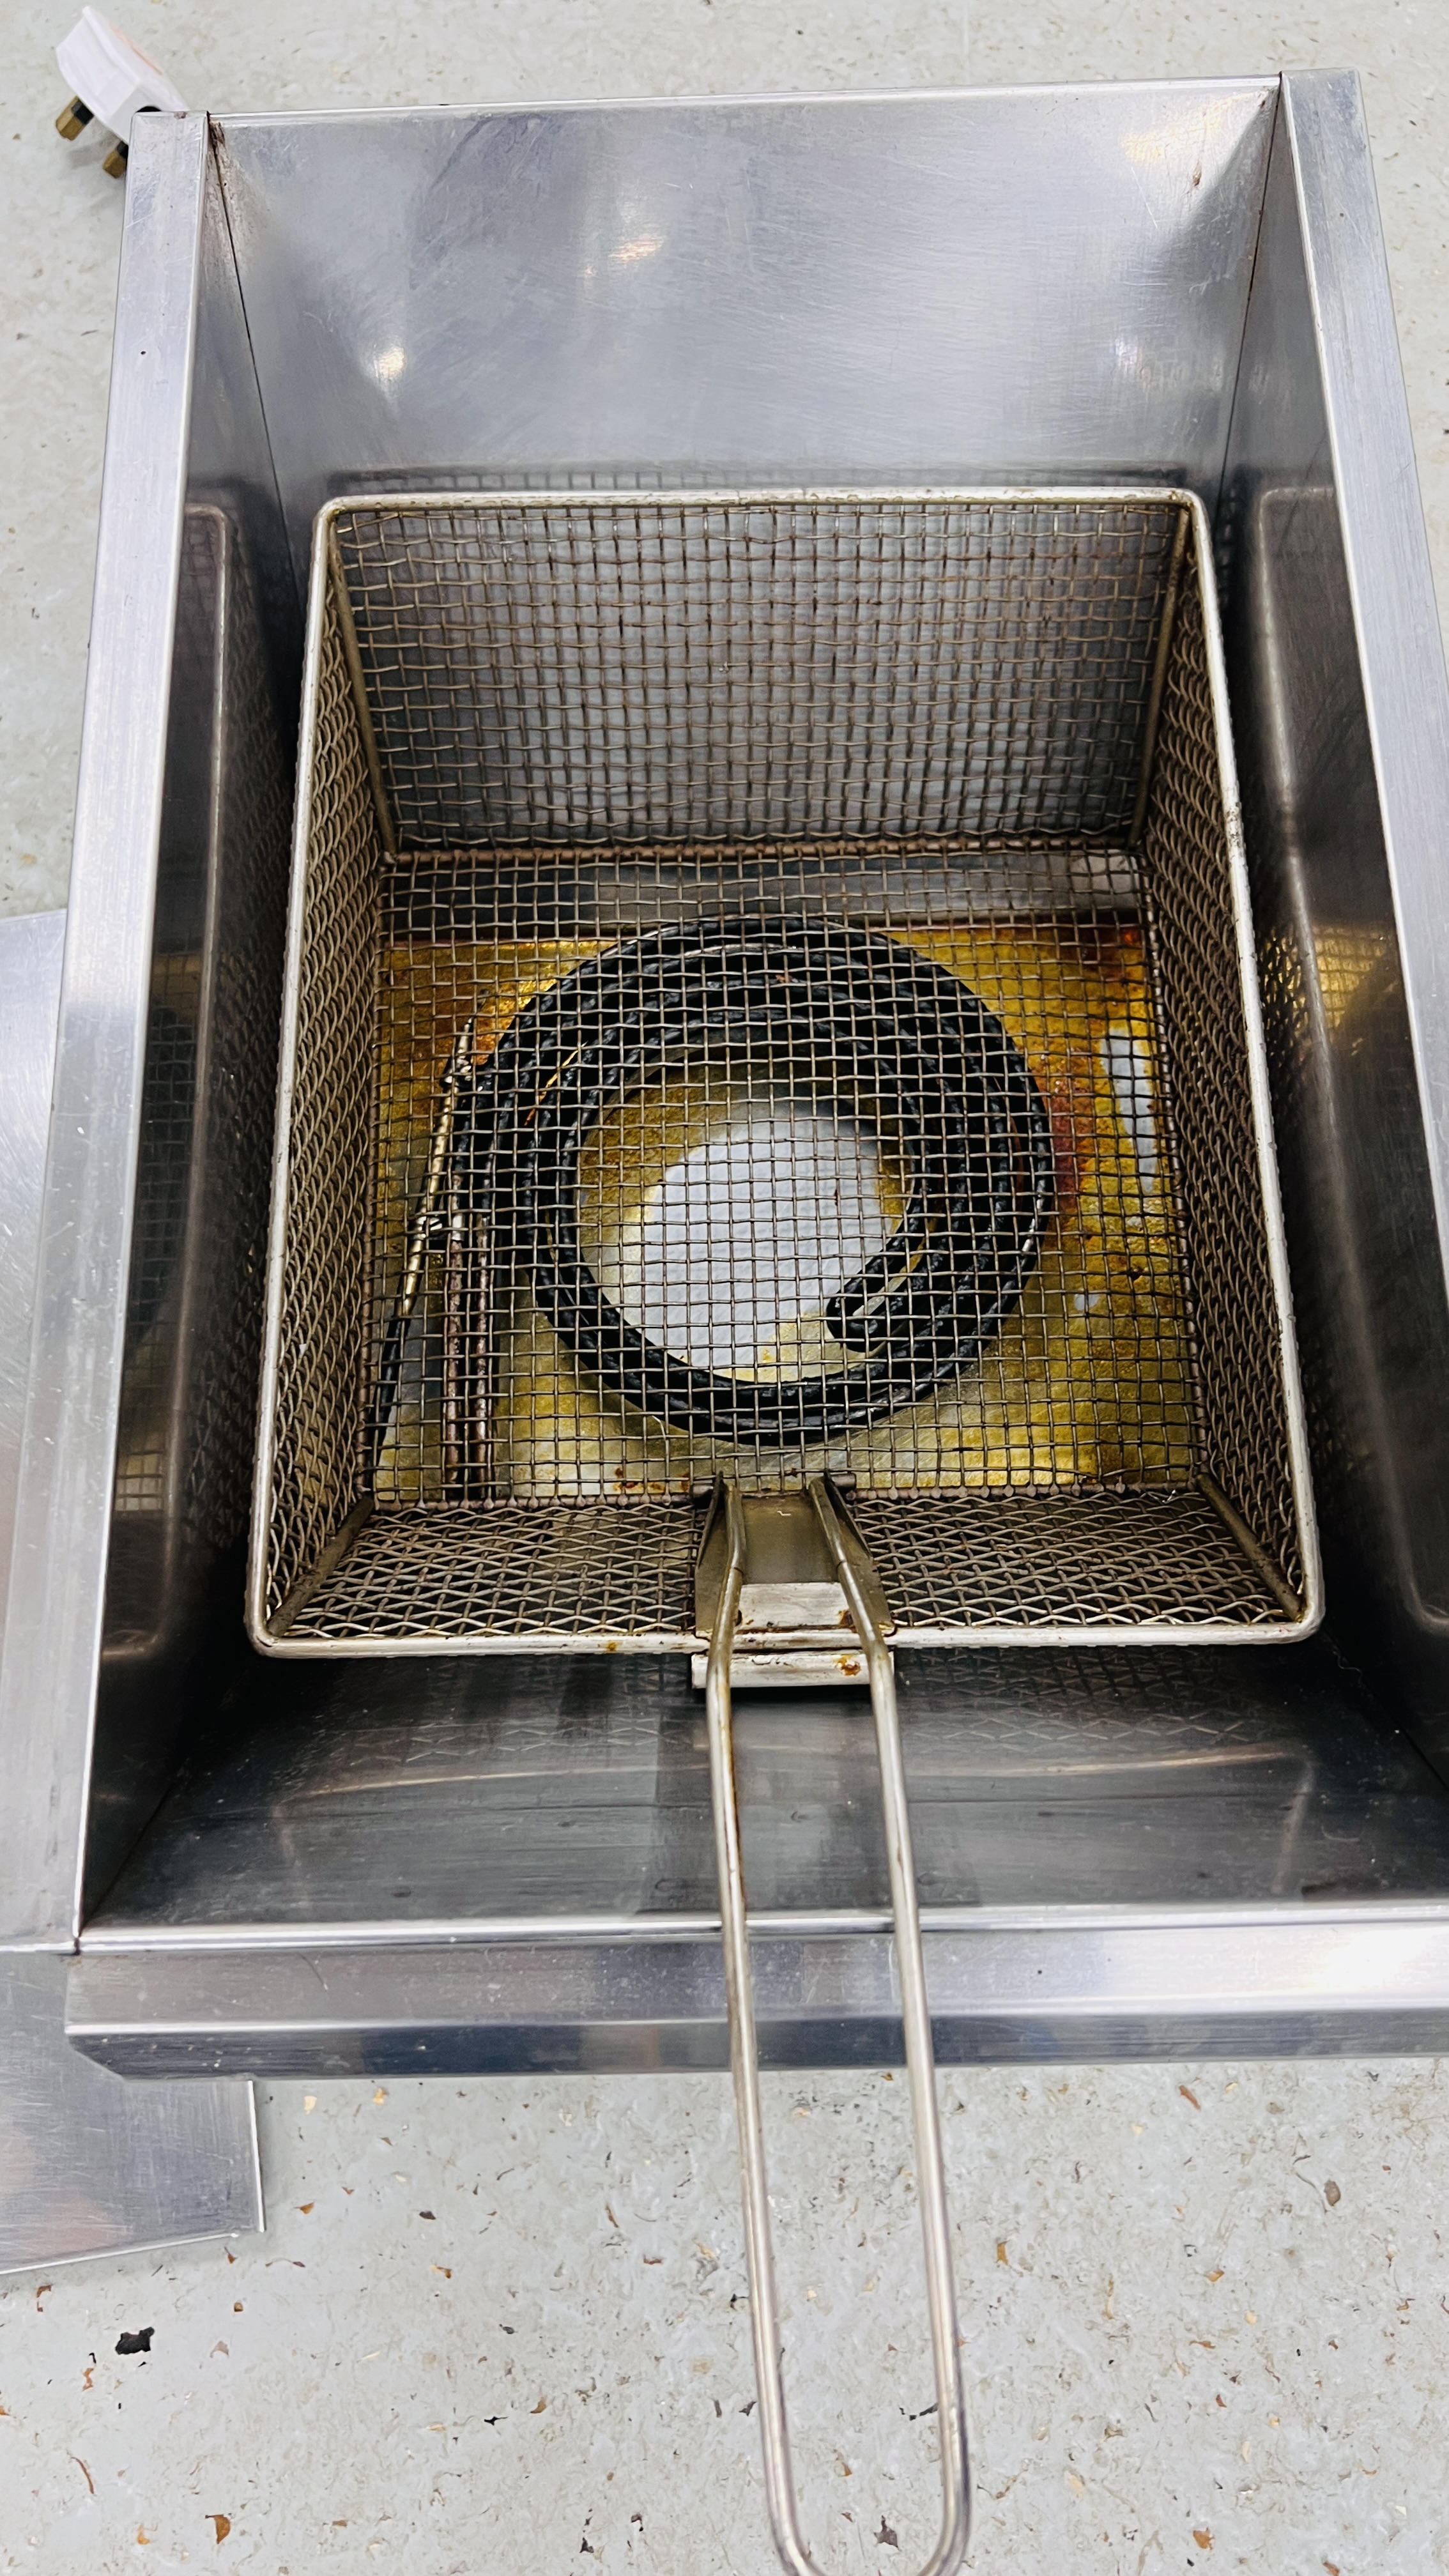 VALENTINE COMMERCIAL DEEP FAT FRYER - SOLD AS SEEN - Image 3 of 5